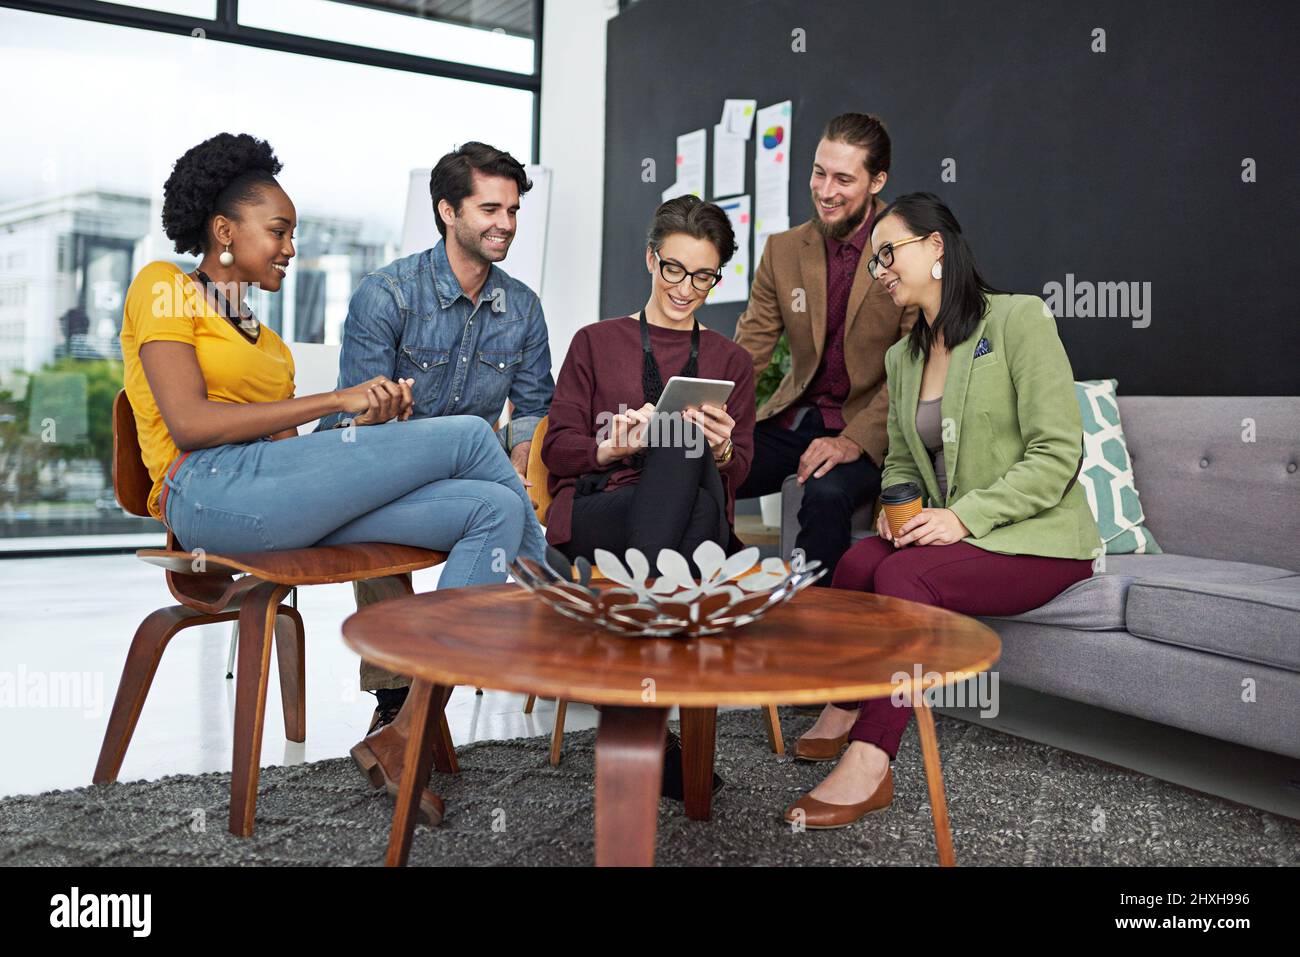 Working hard and dreaming big. Shot of a group of creative businesspeople looking at something on a tablet. Stock Photo